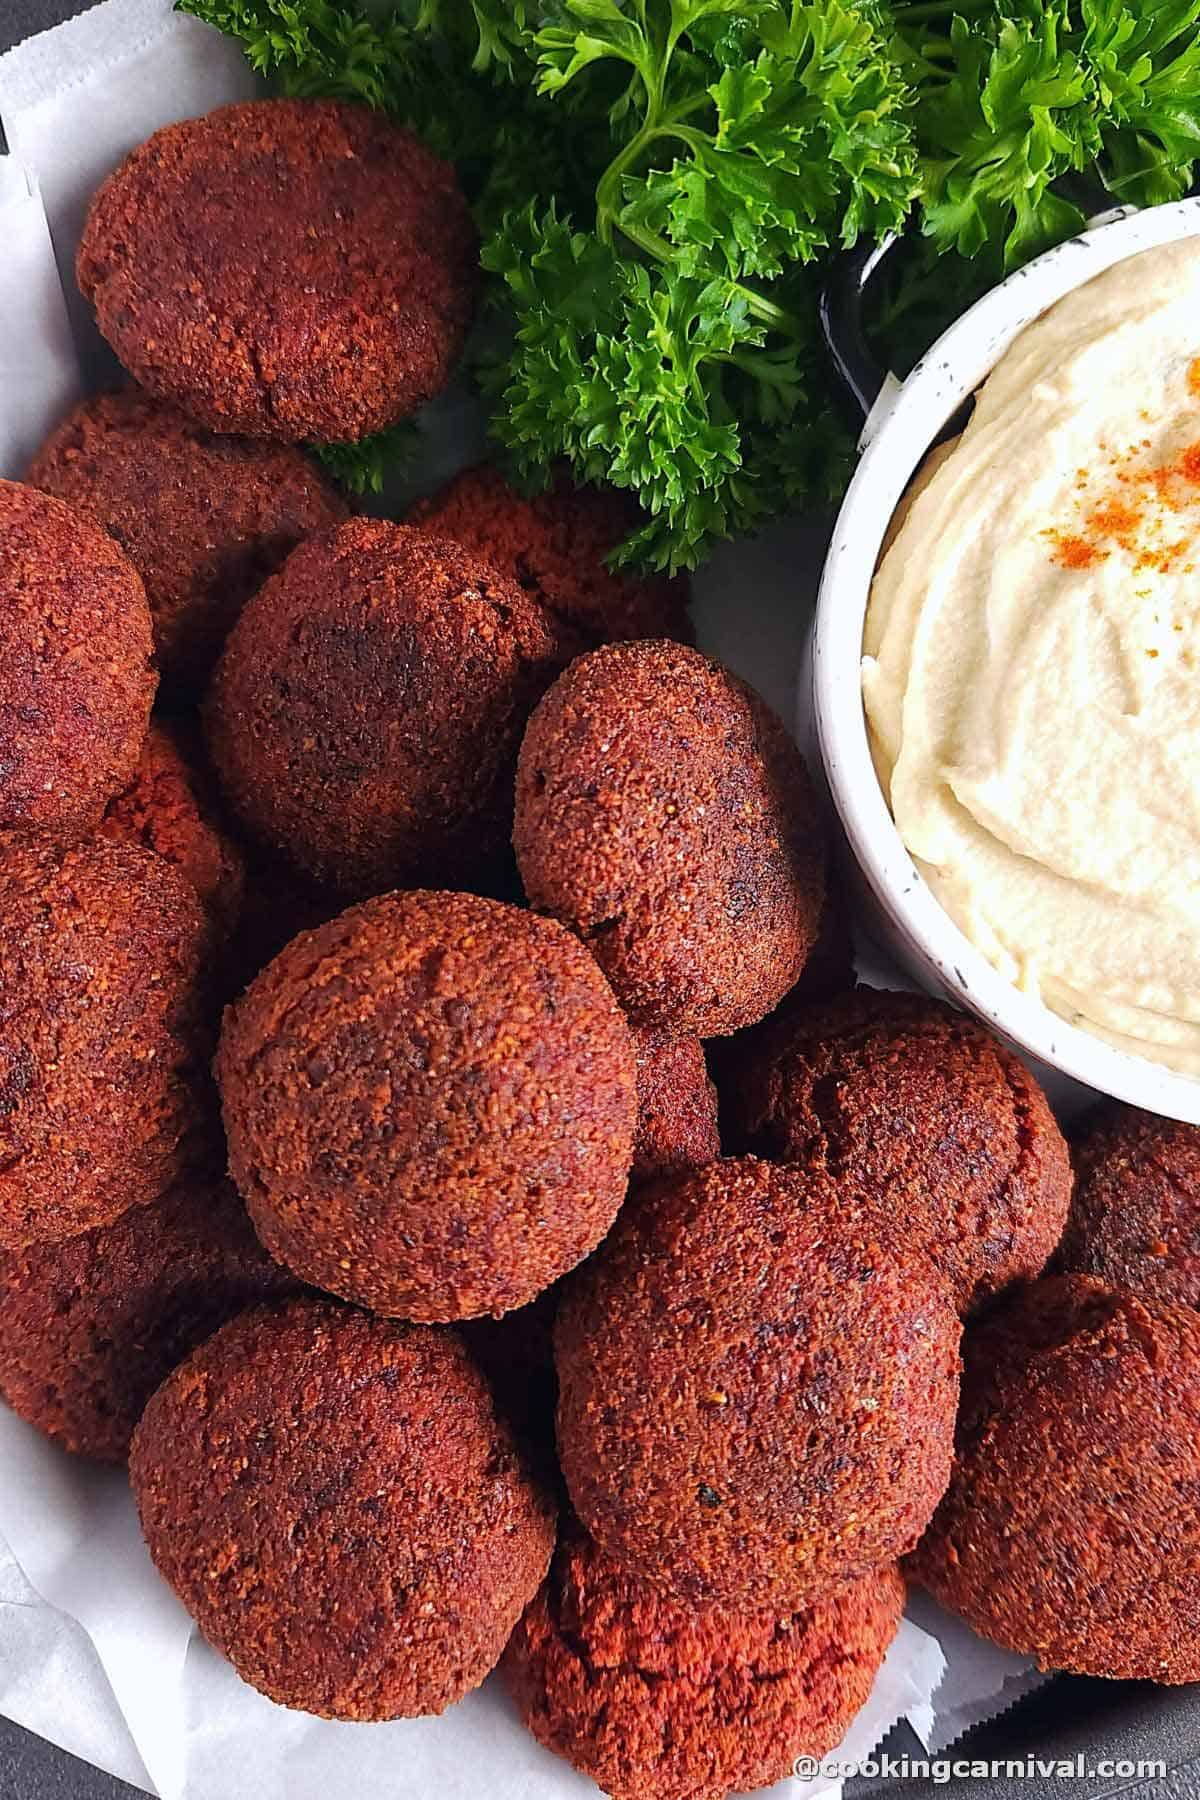 Beetroot falafel served with hummus and garnished with parsley.